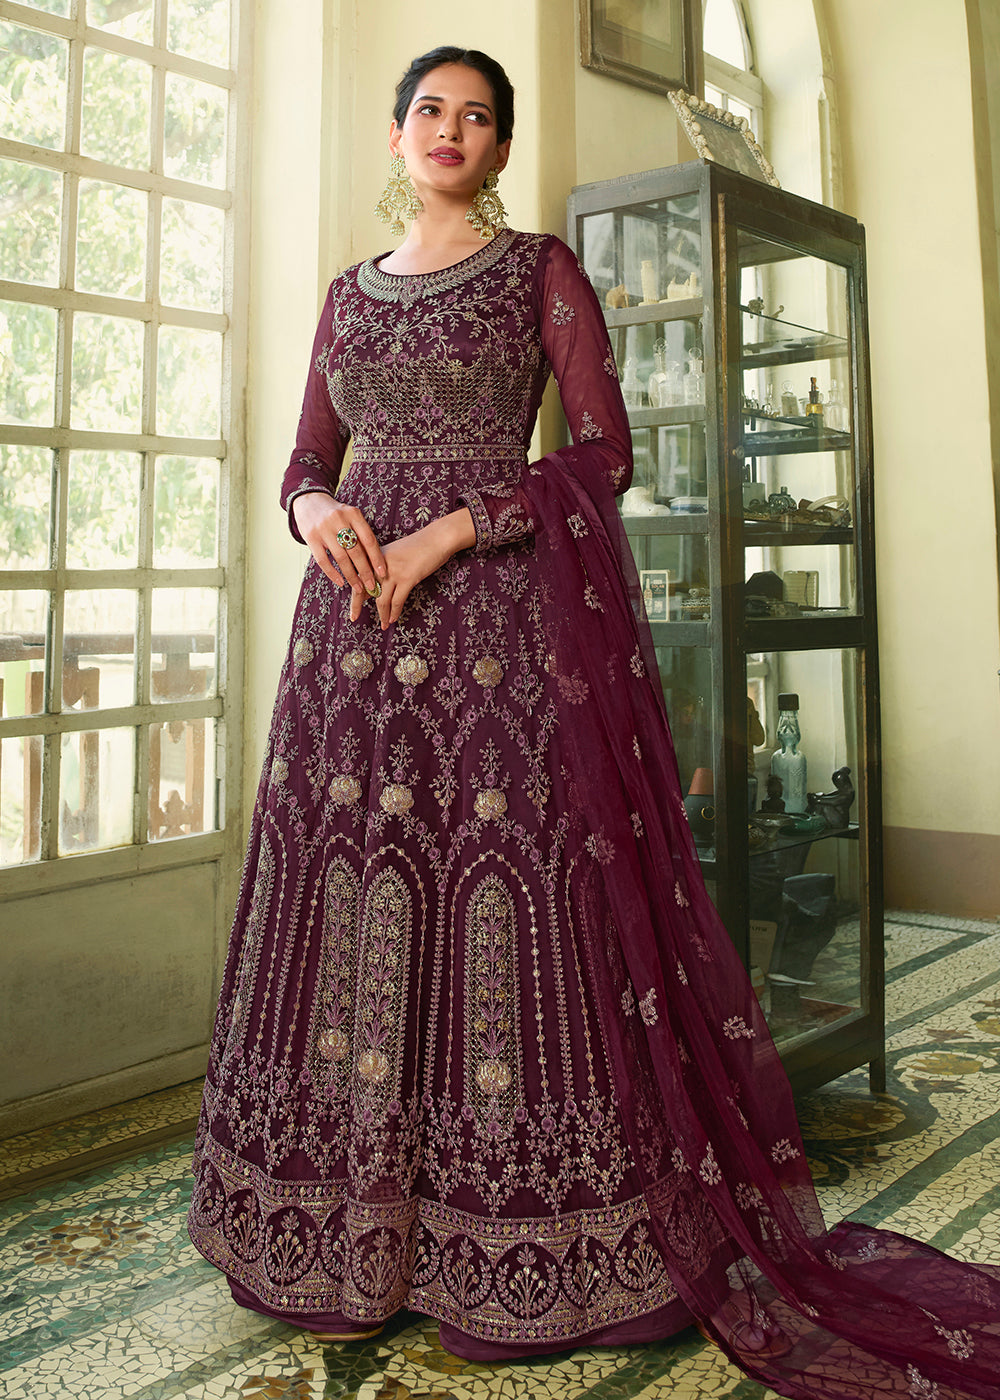 Buy Now Slit Style Outstanding Purple Zari Embroidered Party Festive Anarkali Suit Online in USA, UK, Australia, New Zealand, Canada & Worldwide at Empress Clothing. 